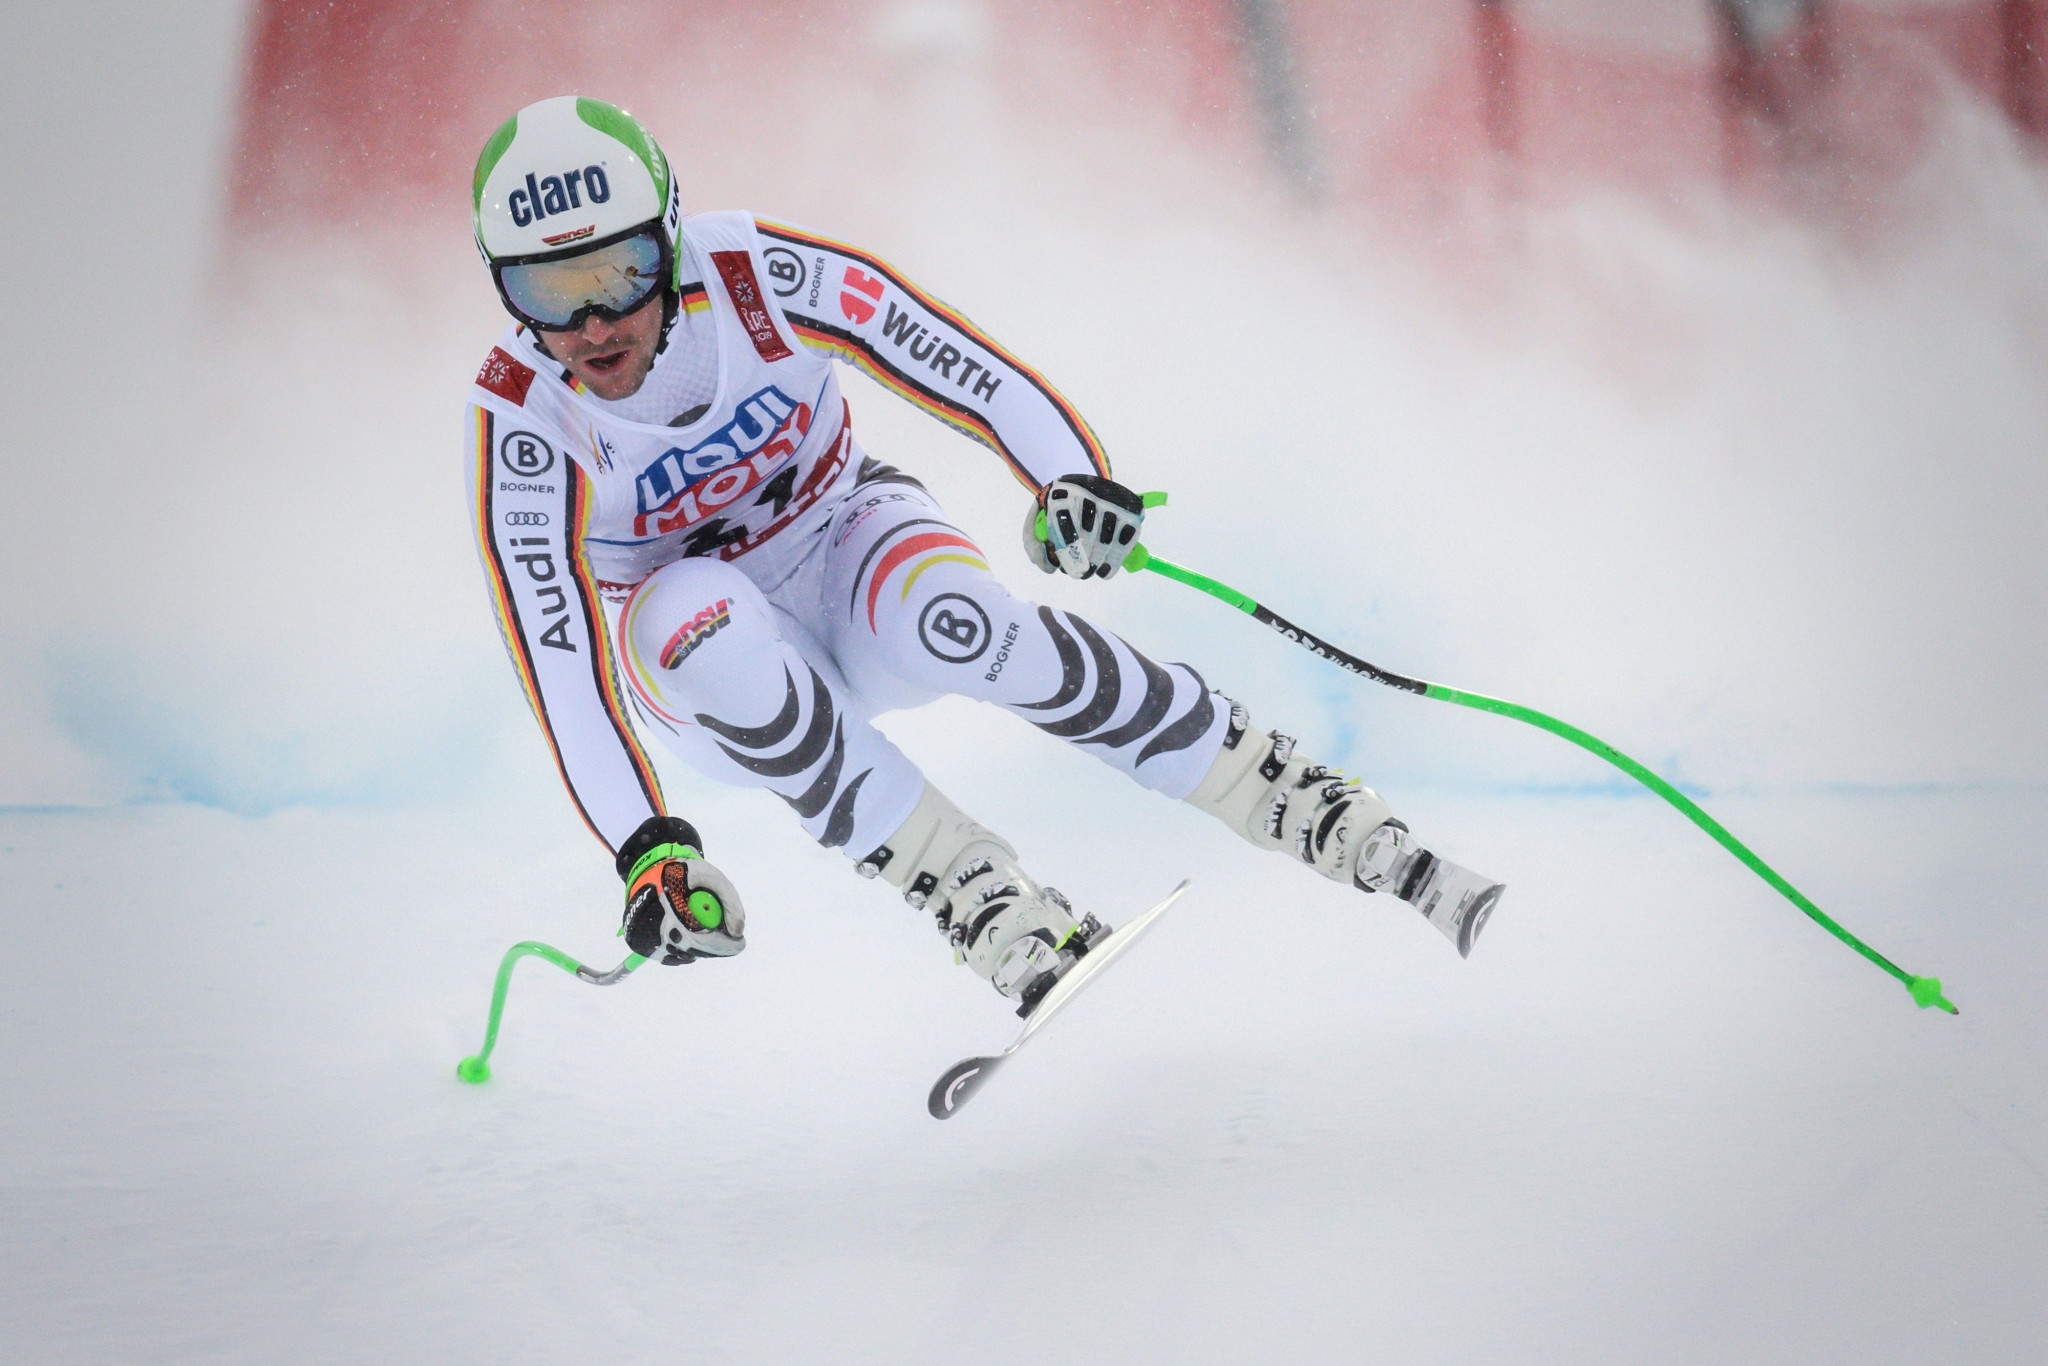 The men's downhill was one of the most anticipated competitions of the World Championships ©Getty Images